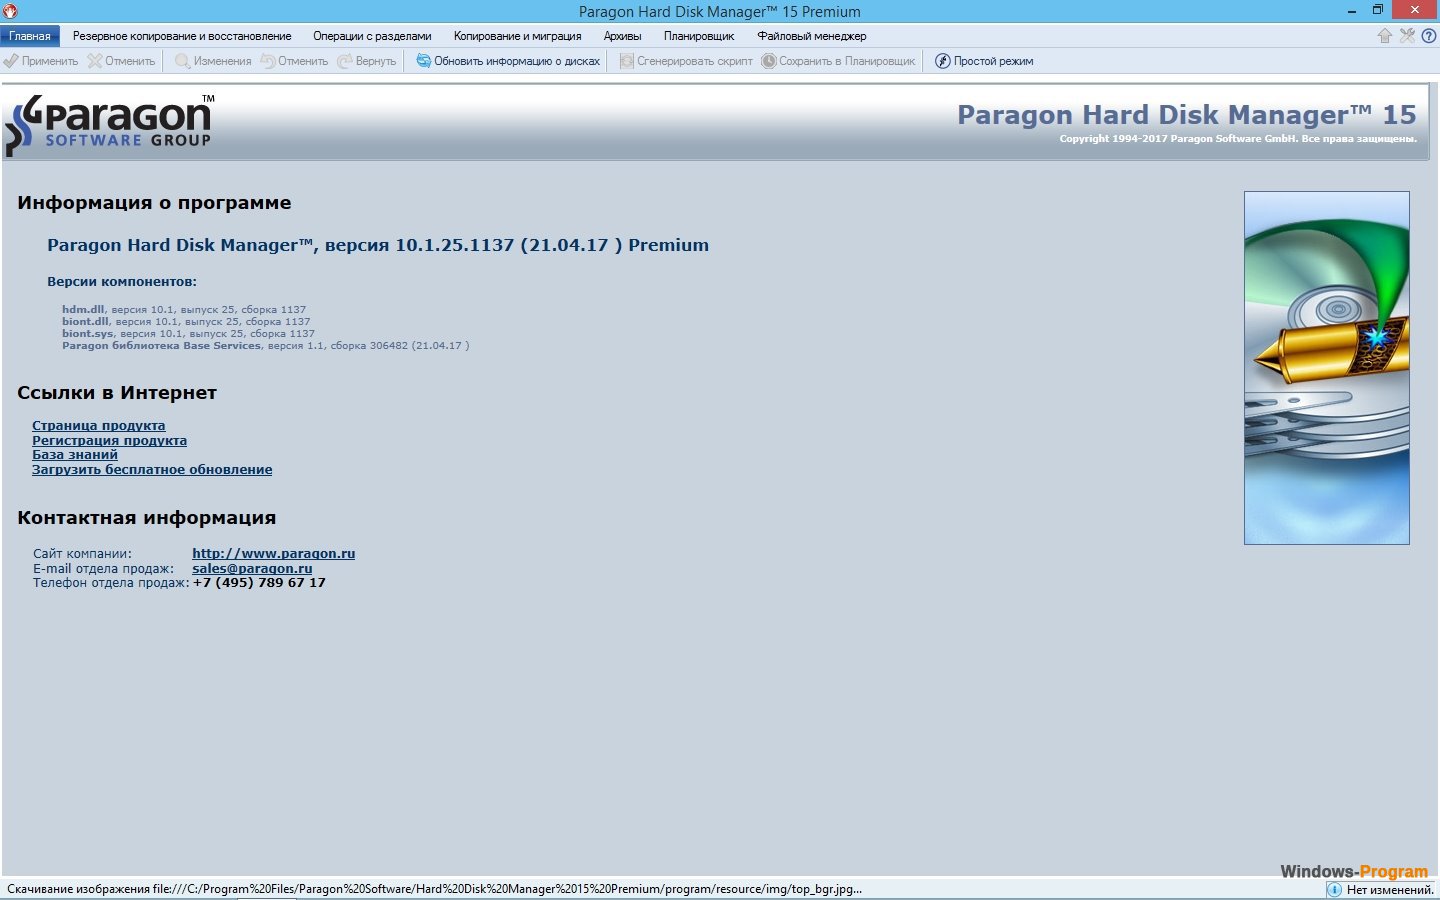 paragon hard disk manager 15 review